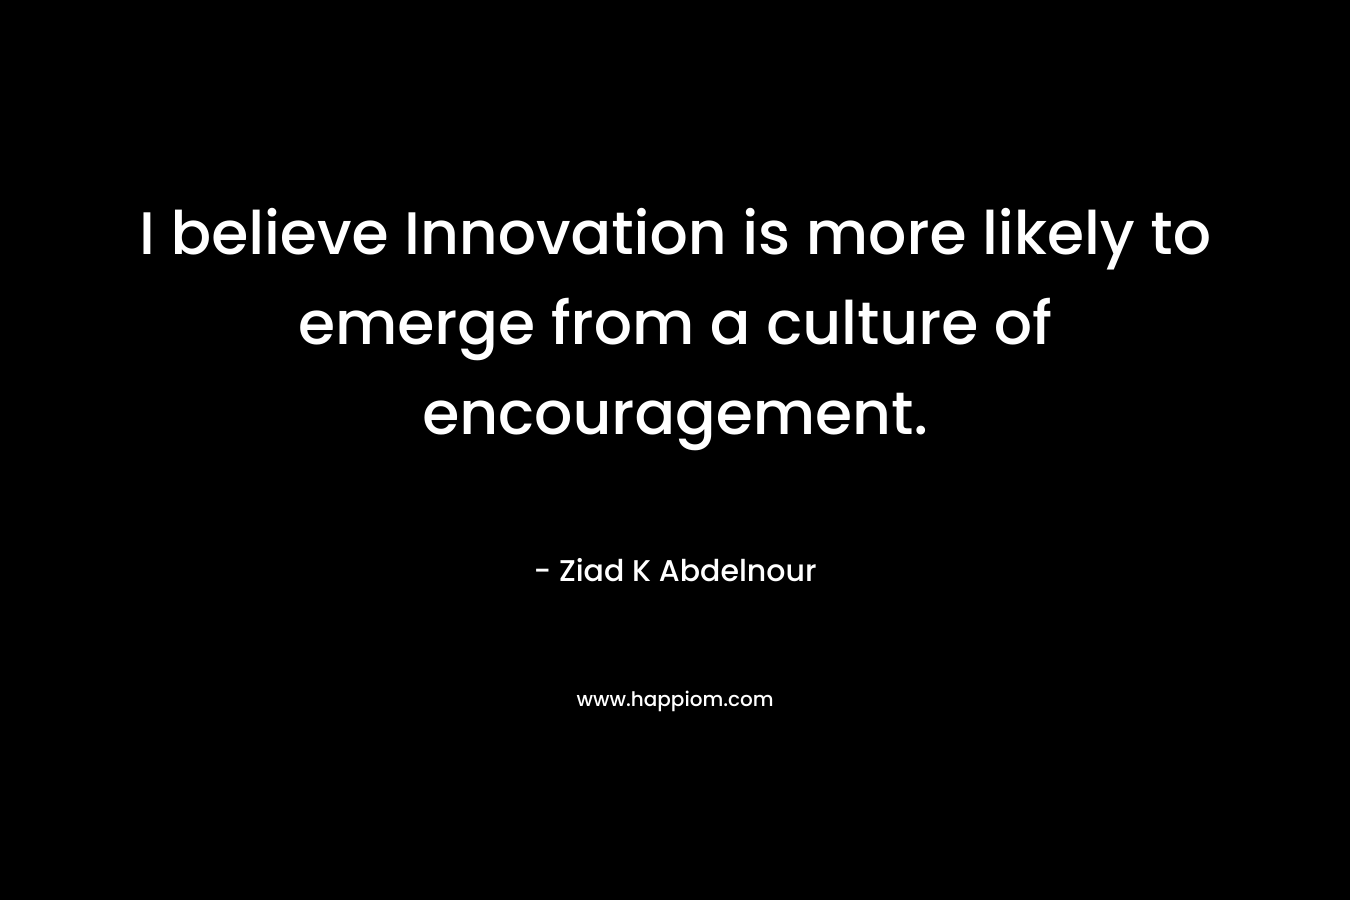 I believe Innovation is more likely to emerge from a culture of encouragement.